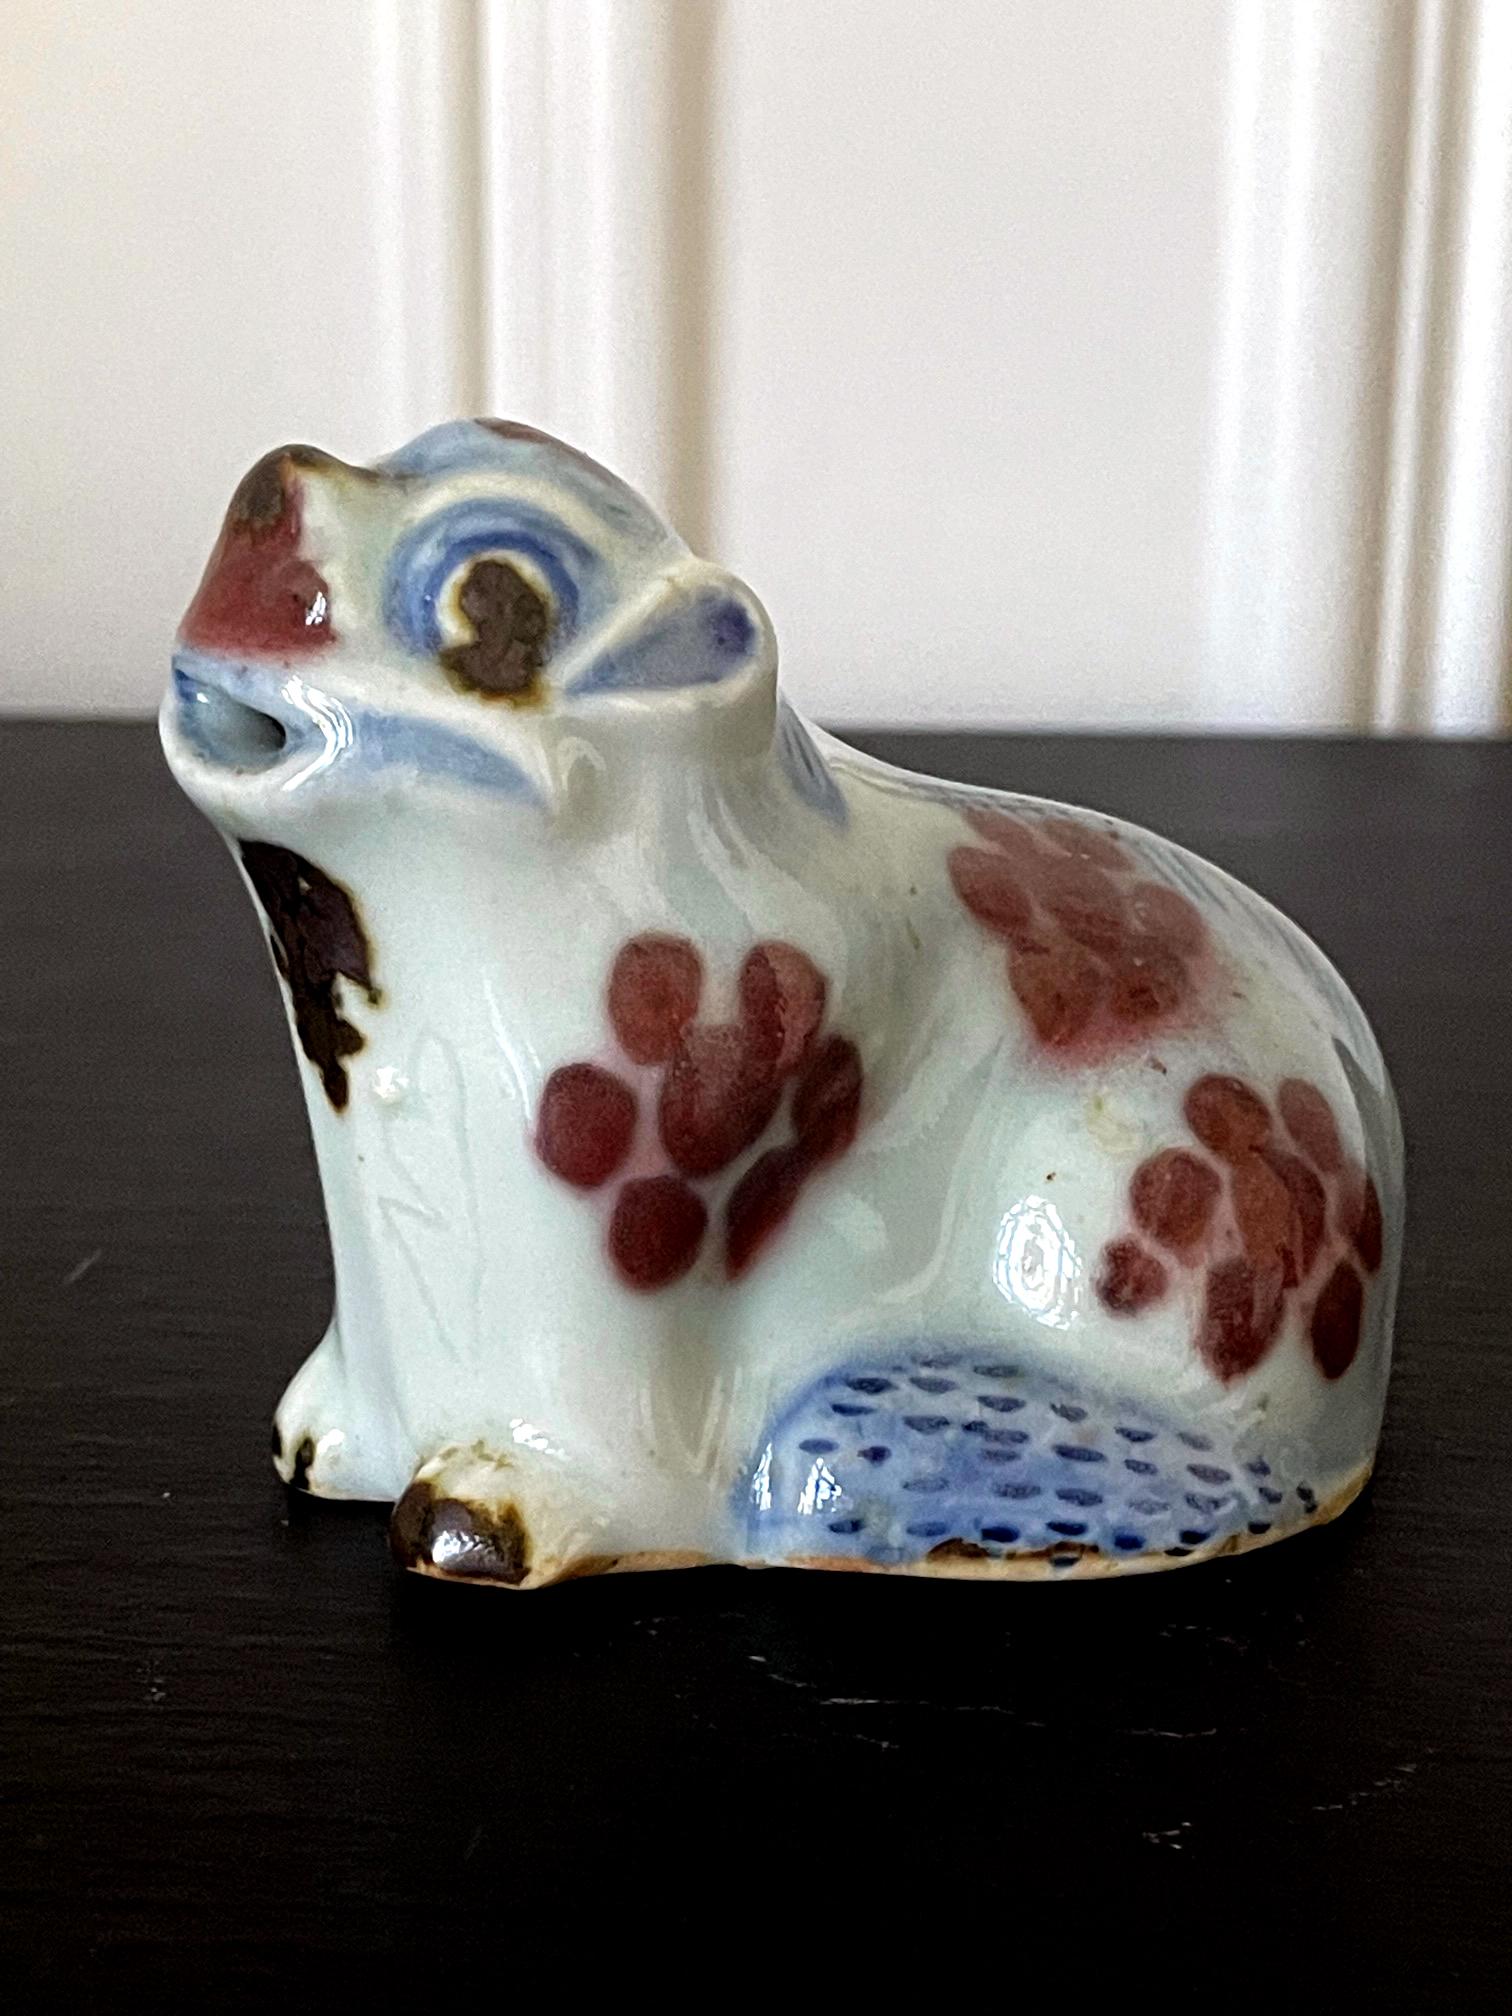 A lovely Korean ceramic water dropper in the form of a sitting dog circa 19th century late Joseon Dynasty. The charming animal form features underglaze blue paint outlining the furs along the spines and legs and iron red cluster markings scattered